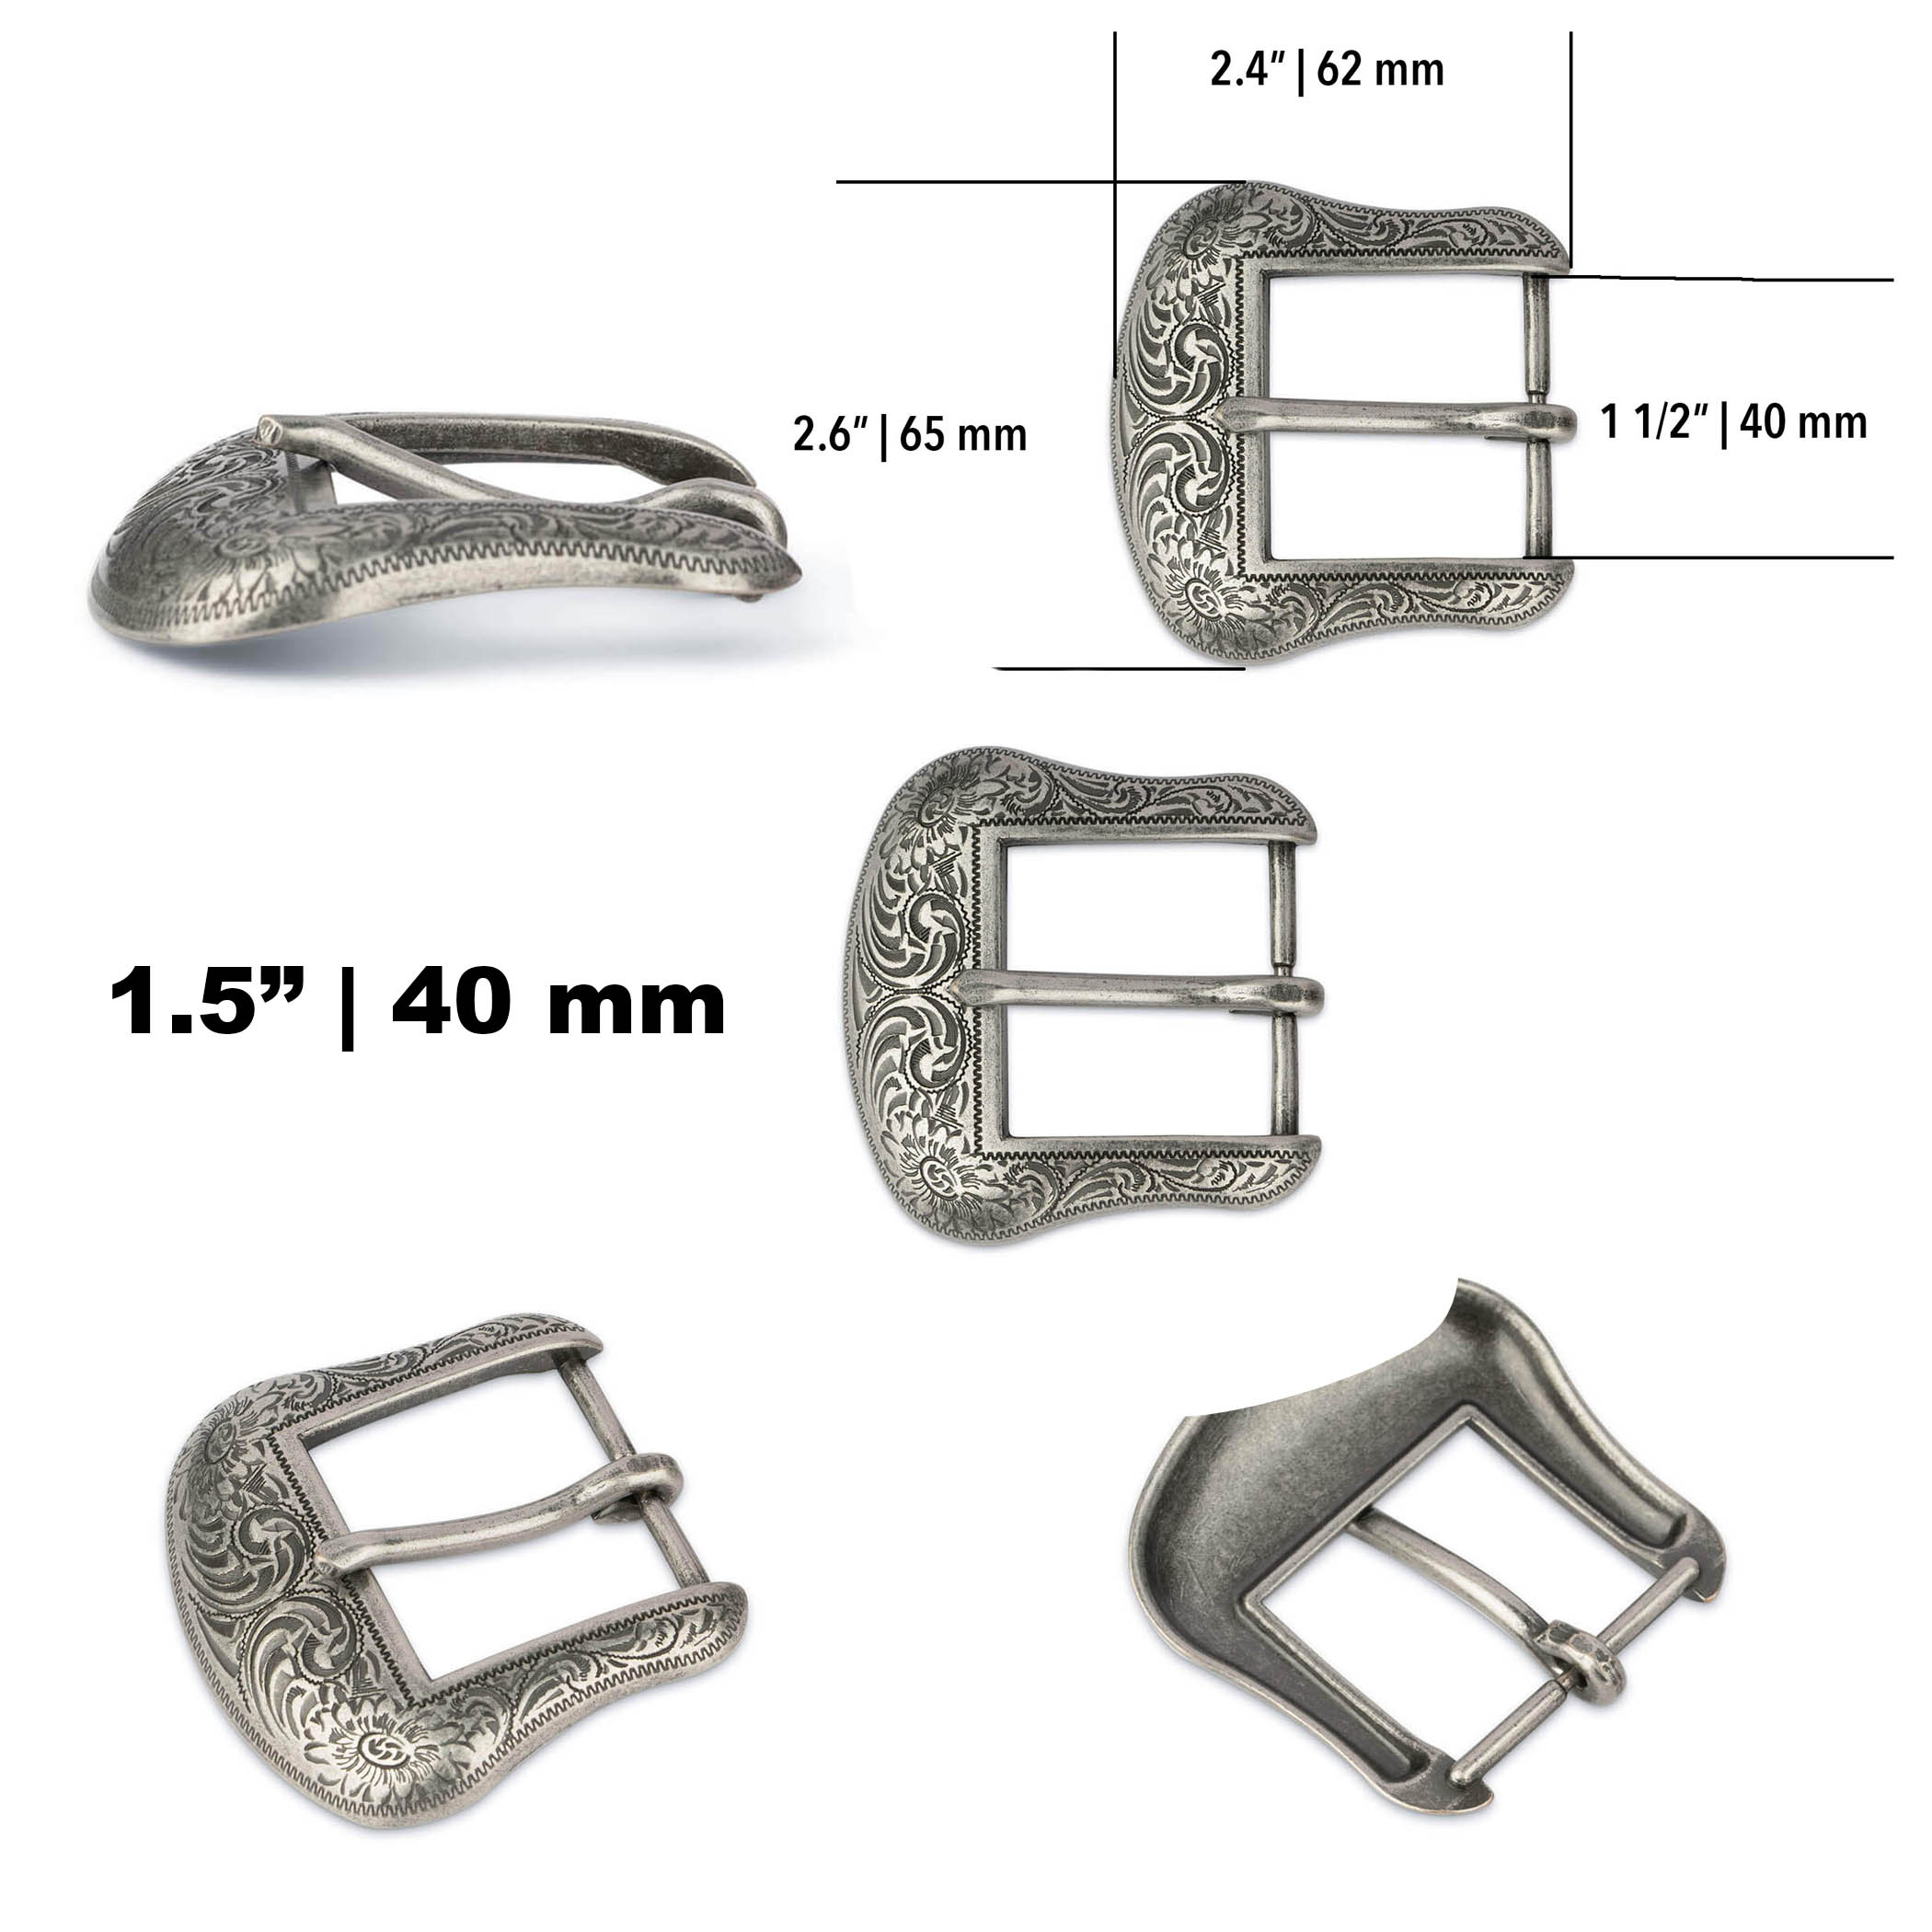 Replacement Silver Cowboy Buckle for Leather Belts 40 mm